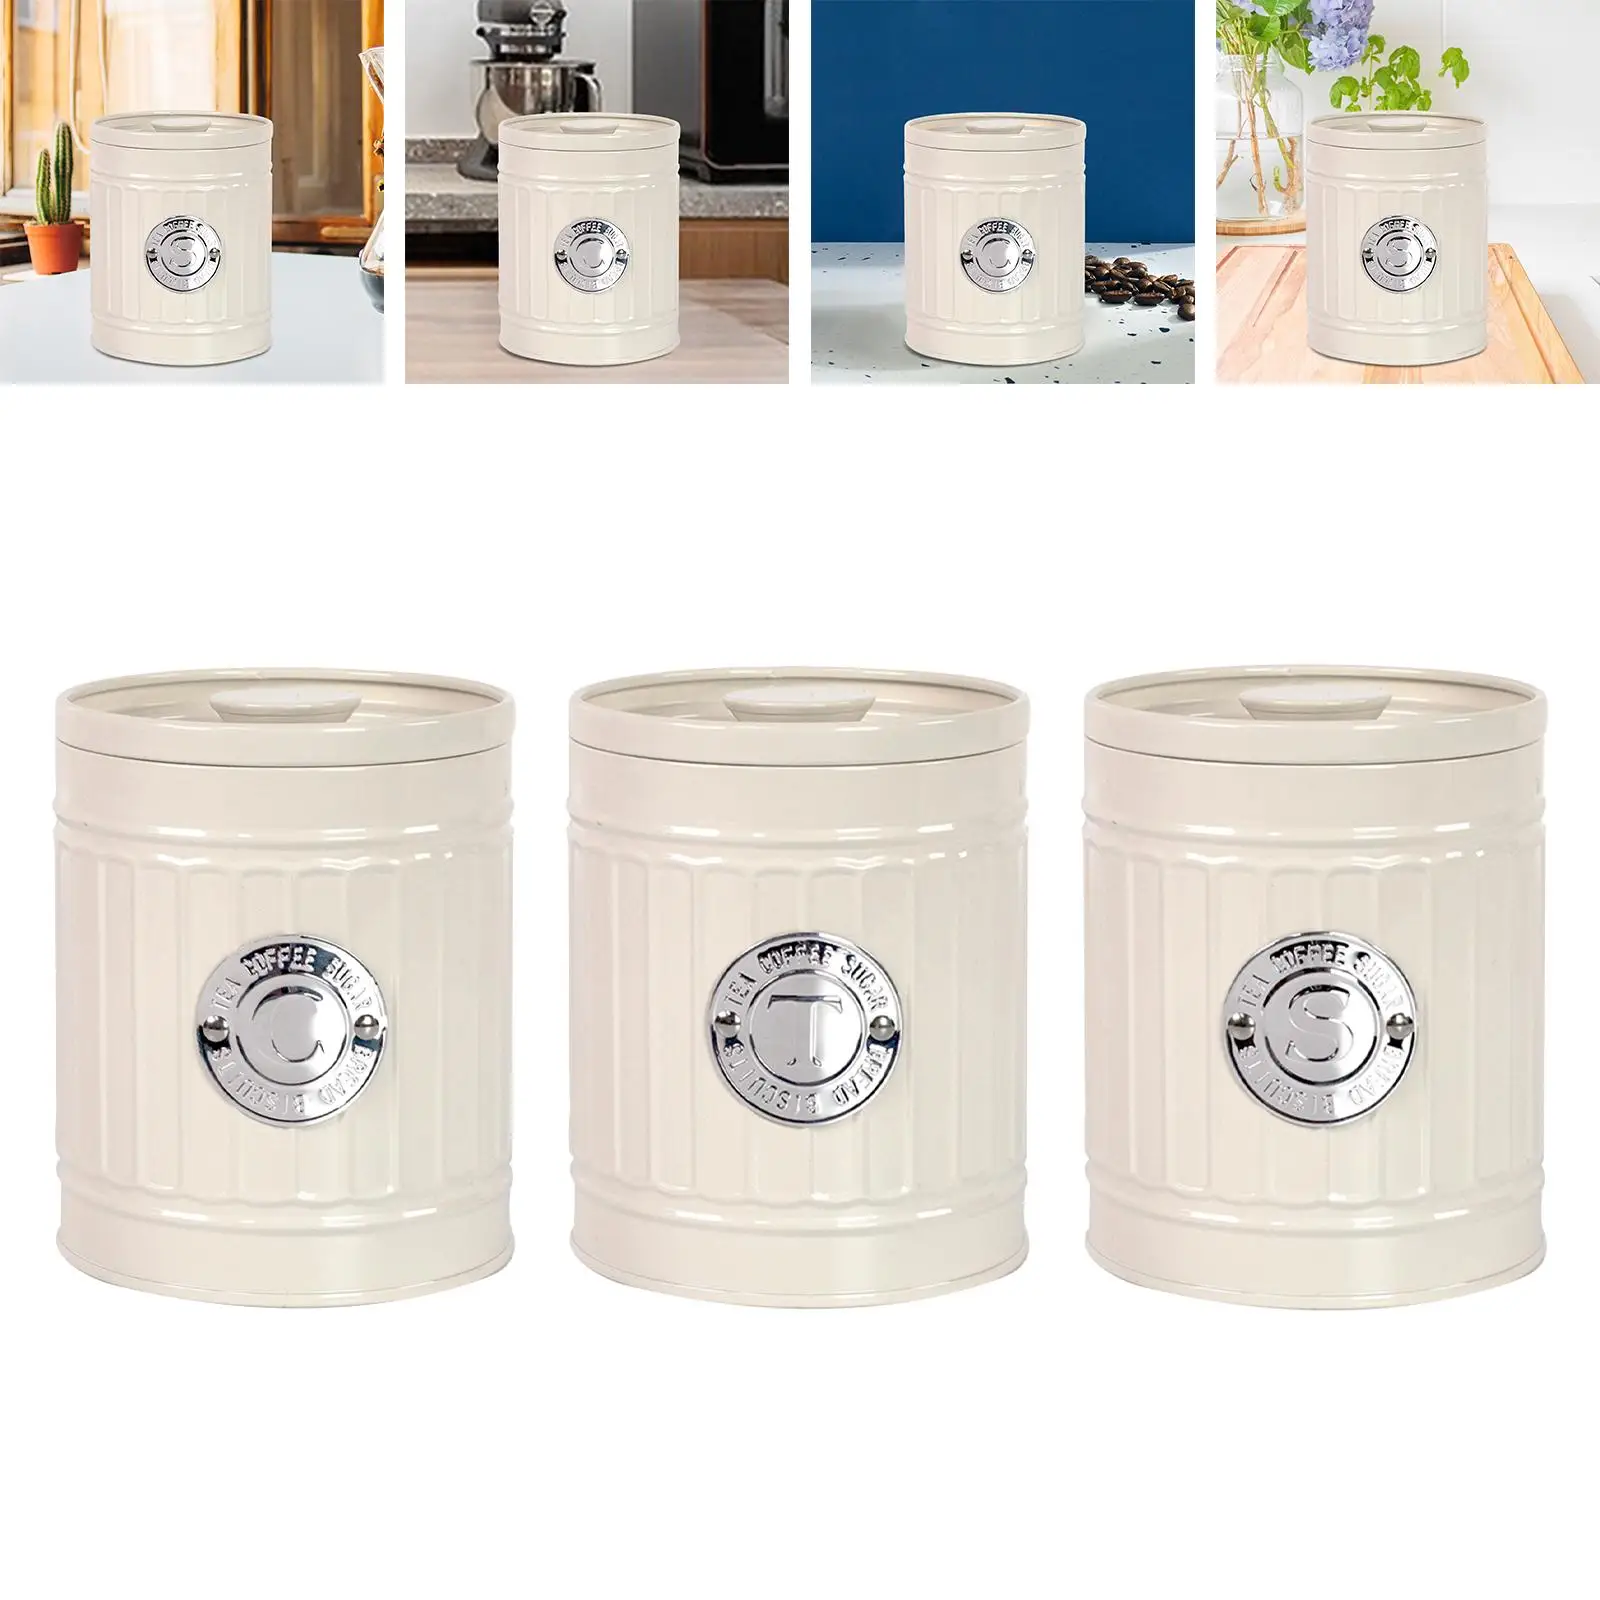 Coffee Canister Kitchen Canister Coffee Storage Container Food Storage Container for Tea Sugar Coffee Cookie Kitchen Counter